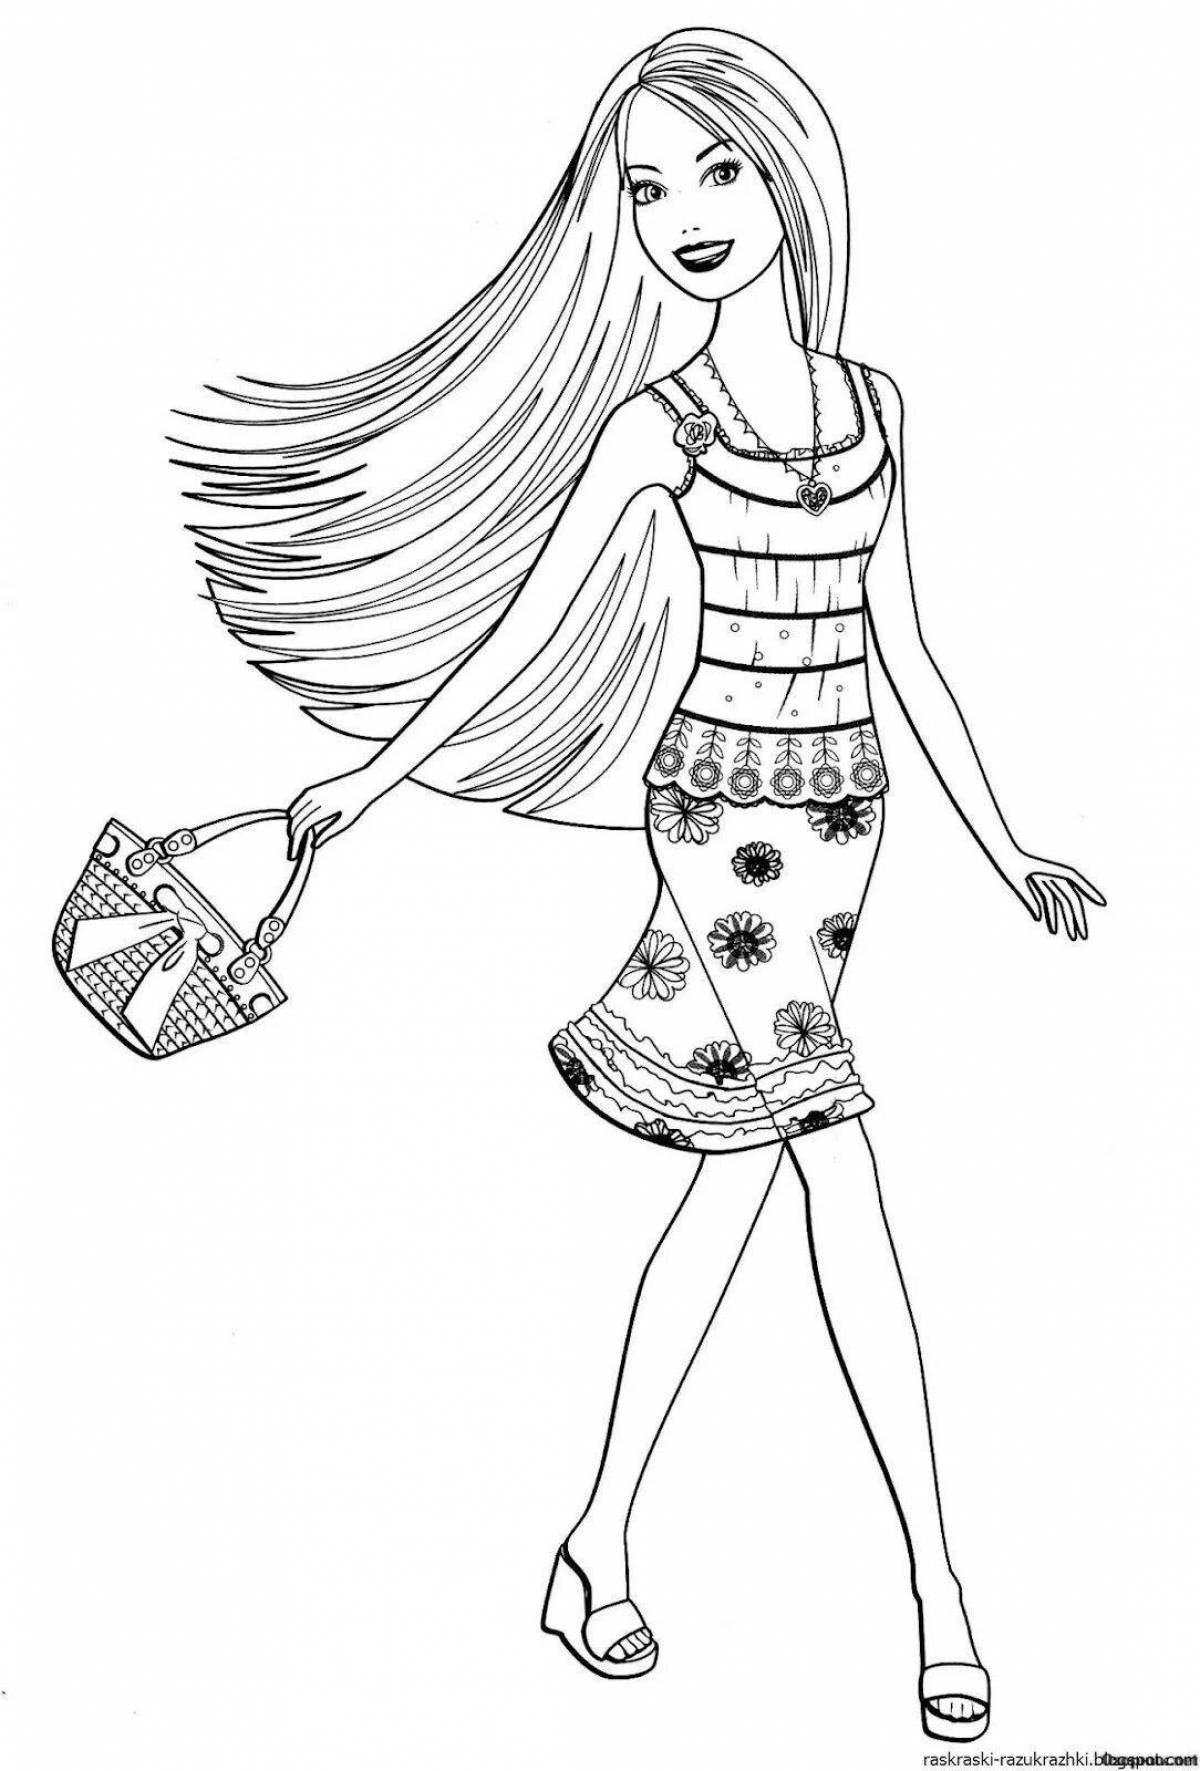 Fun fashion girls coloring pages